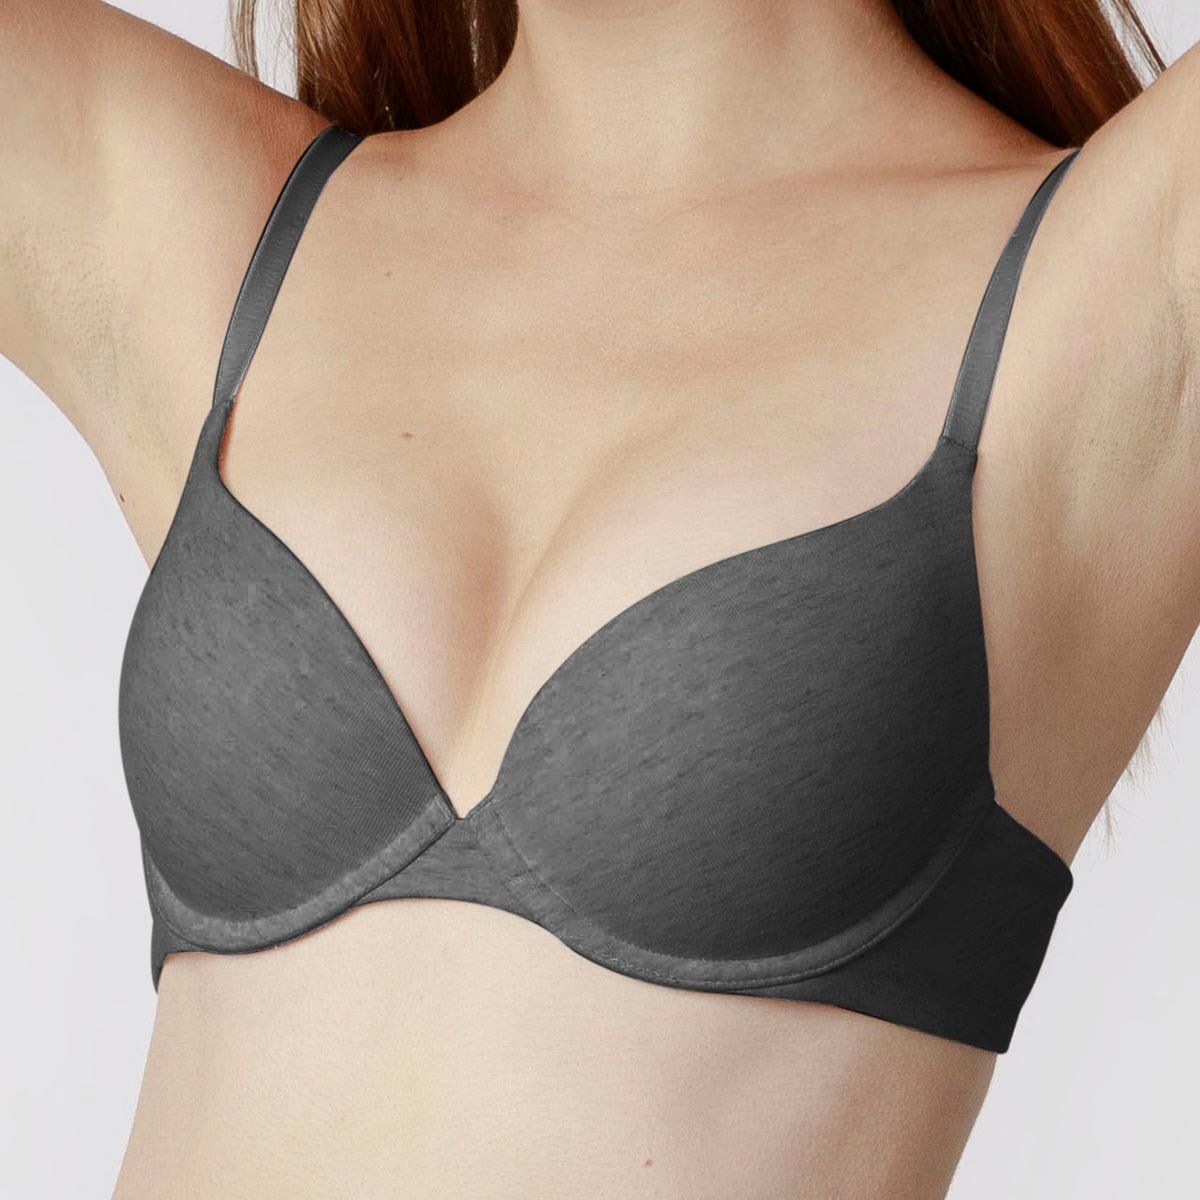 Easy Fit Heathered Cotton Thin Pad Bra Bra Her Own Words 